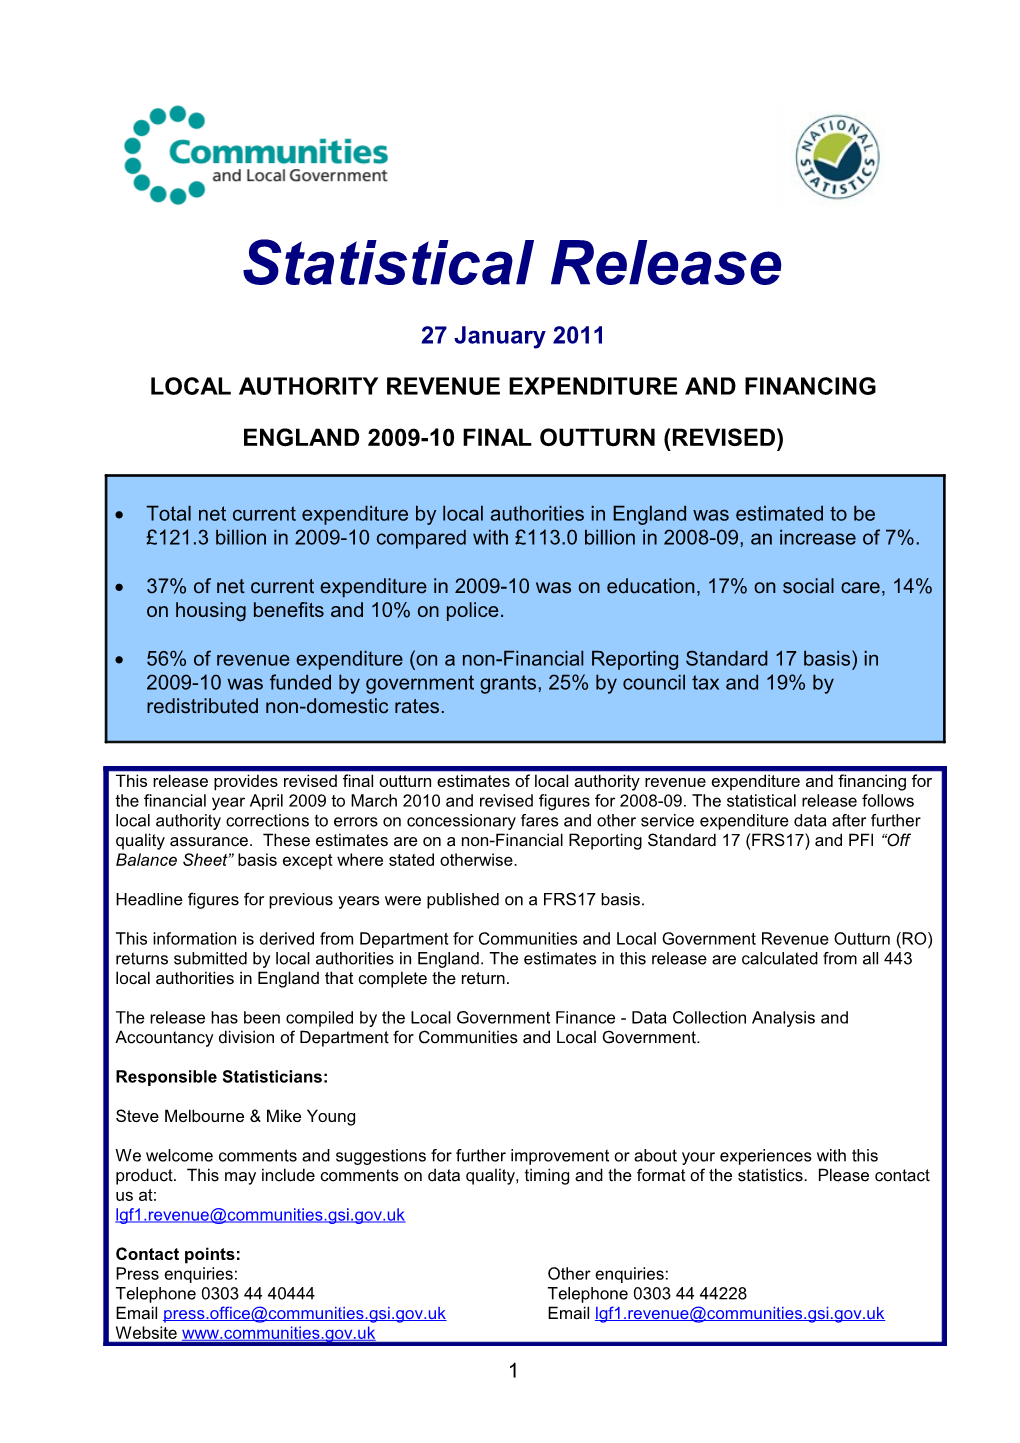 Local Authority Revenue Expenditure and Financing